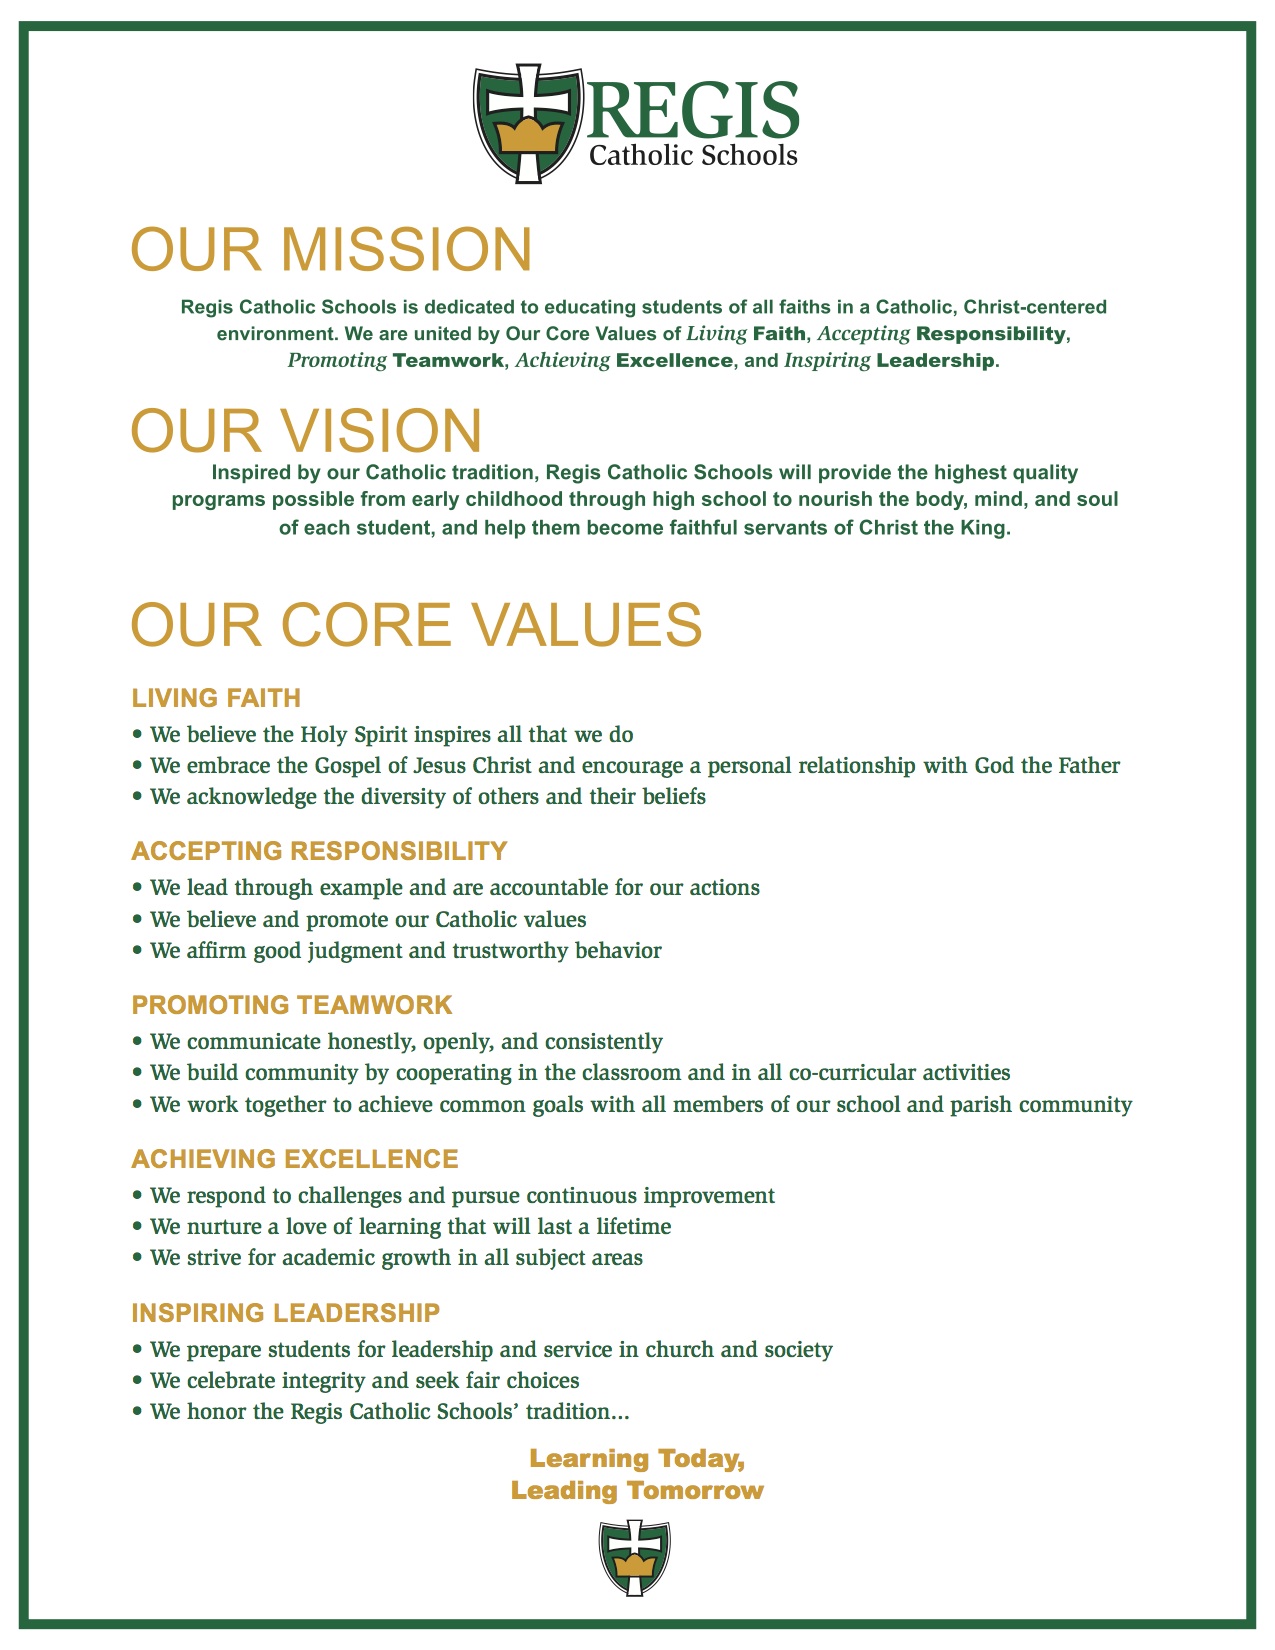 Regis Mission, vision, and values